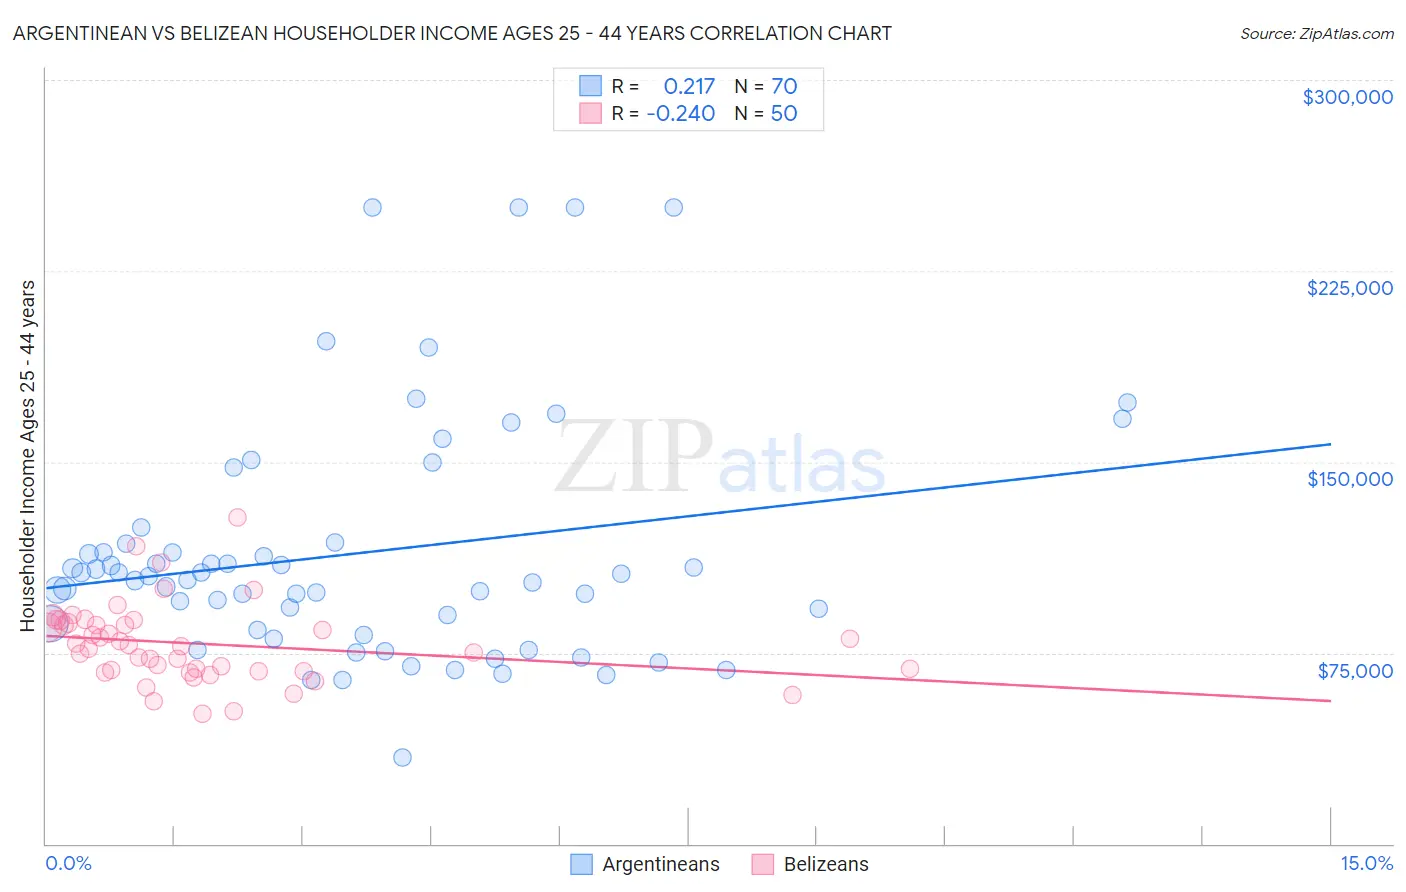 Argentinean vs Belizean Householder Income Ages 25 - 44 years